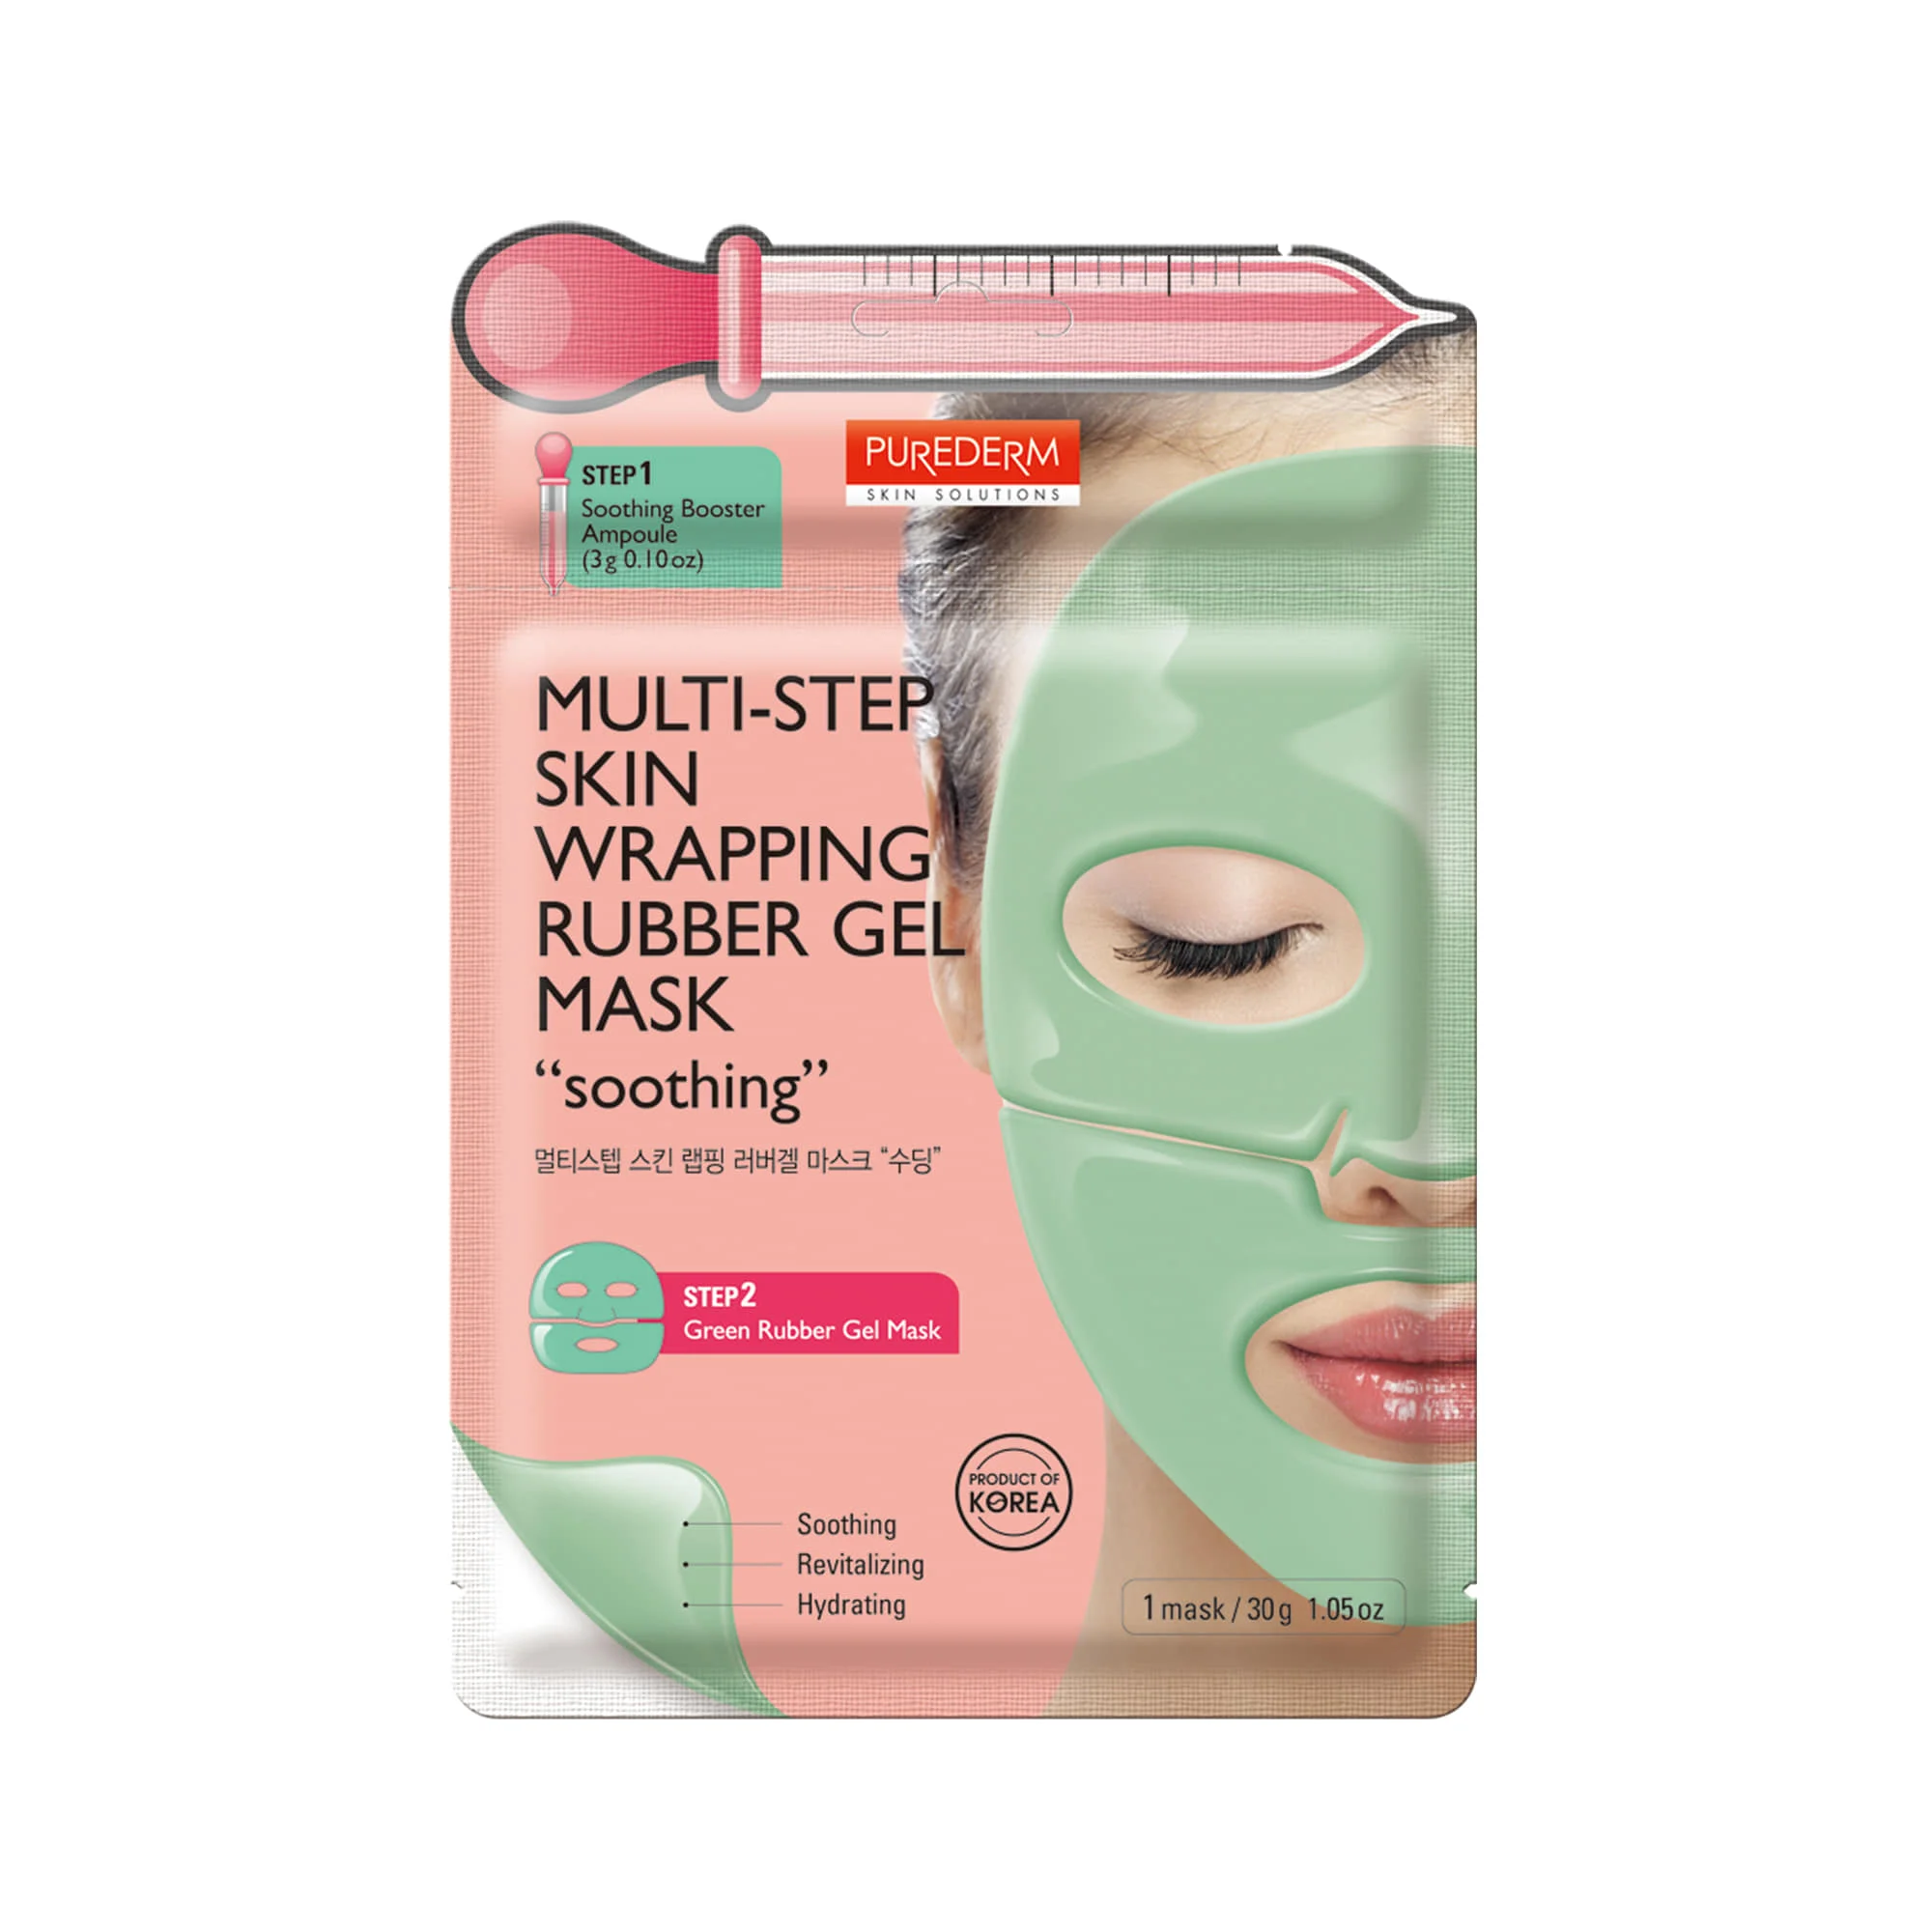 Step skins. Purederm маска гидрогелевая. Purederm Rubber Gel Mask. Purederm Multi-Step Skin Wrapping Rubber Gel Mask Firming. Purederm] маска для лица Mud Mask Pore Cleansing/Relax Soothing/Skin Brightening 15gr (Purederm) (Pink Clay).